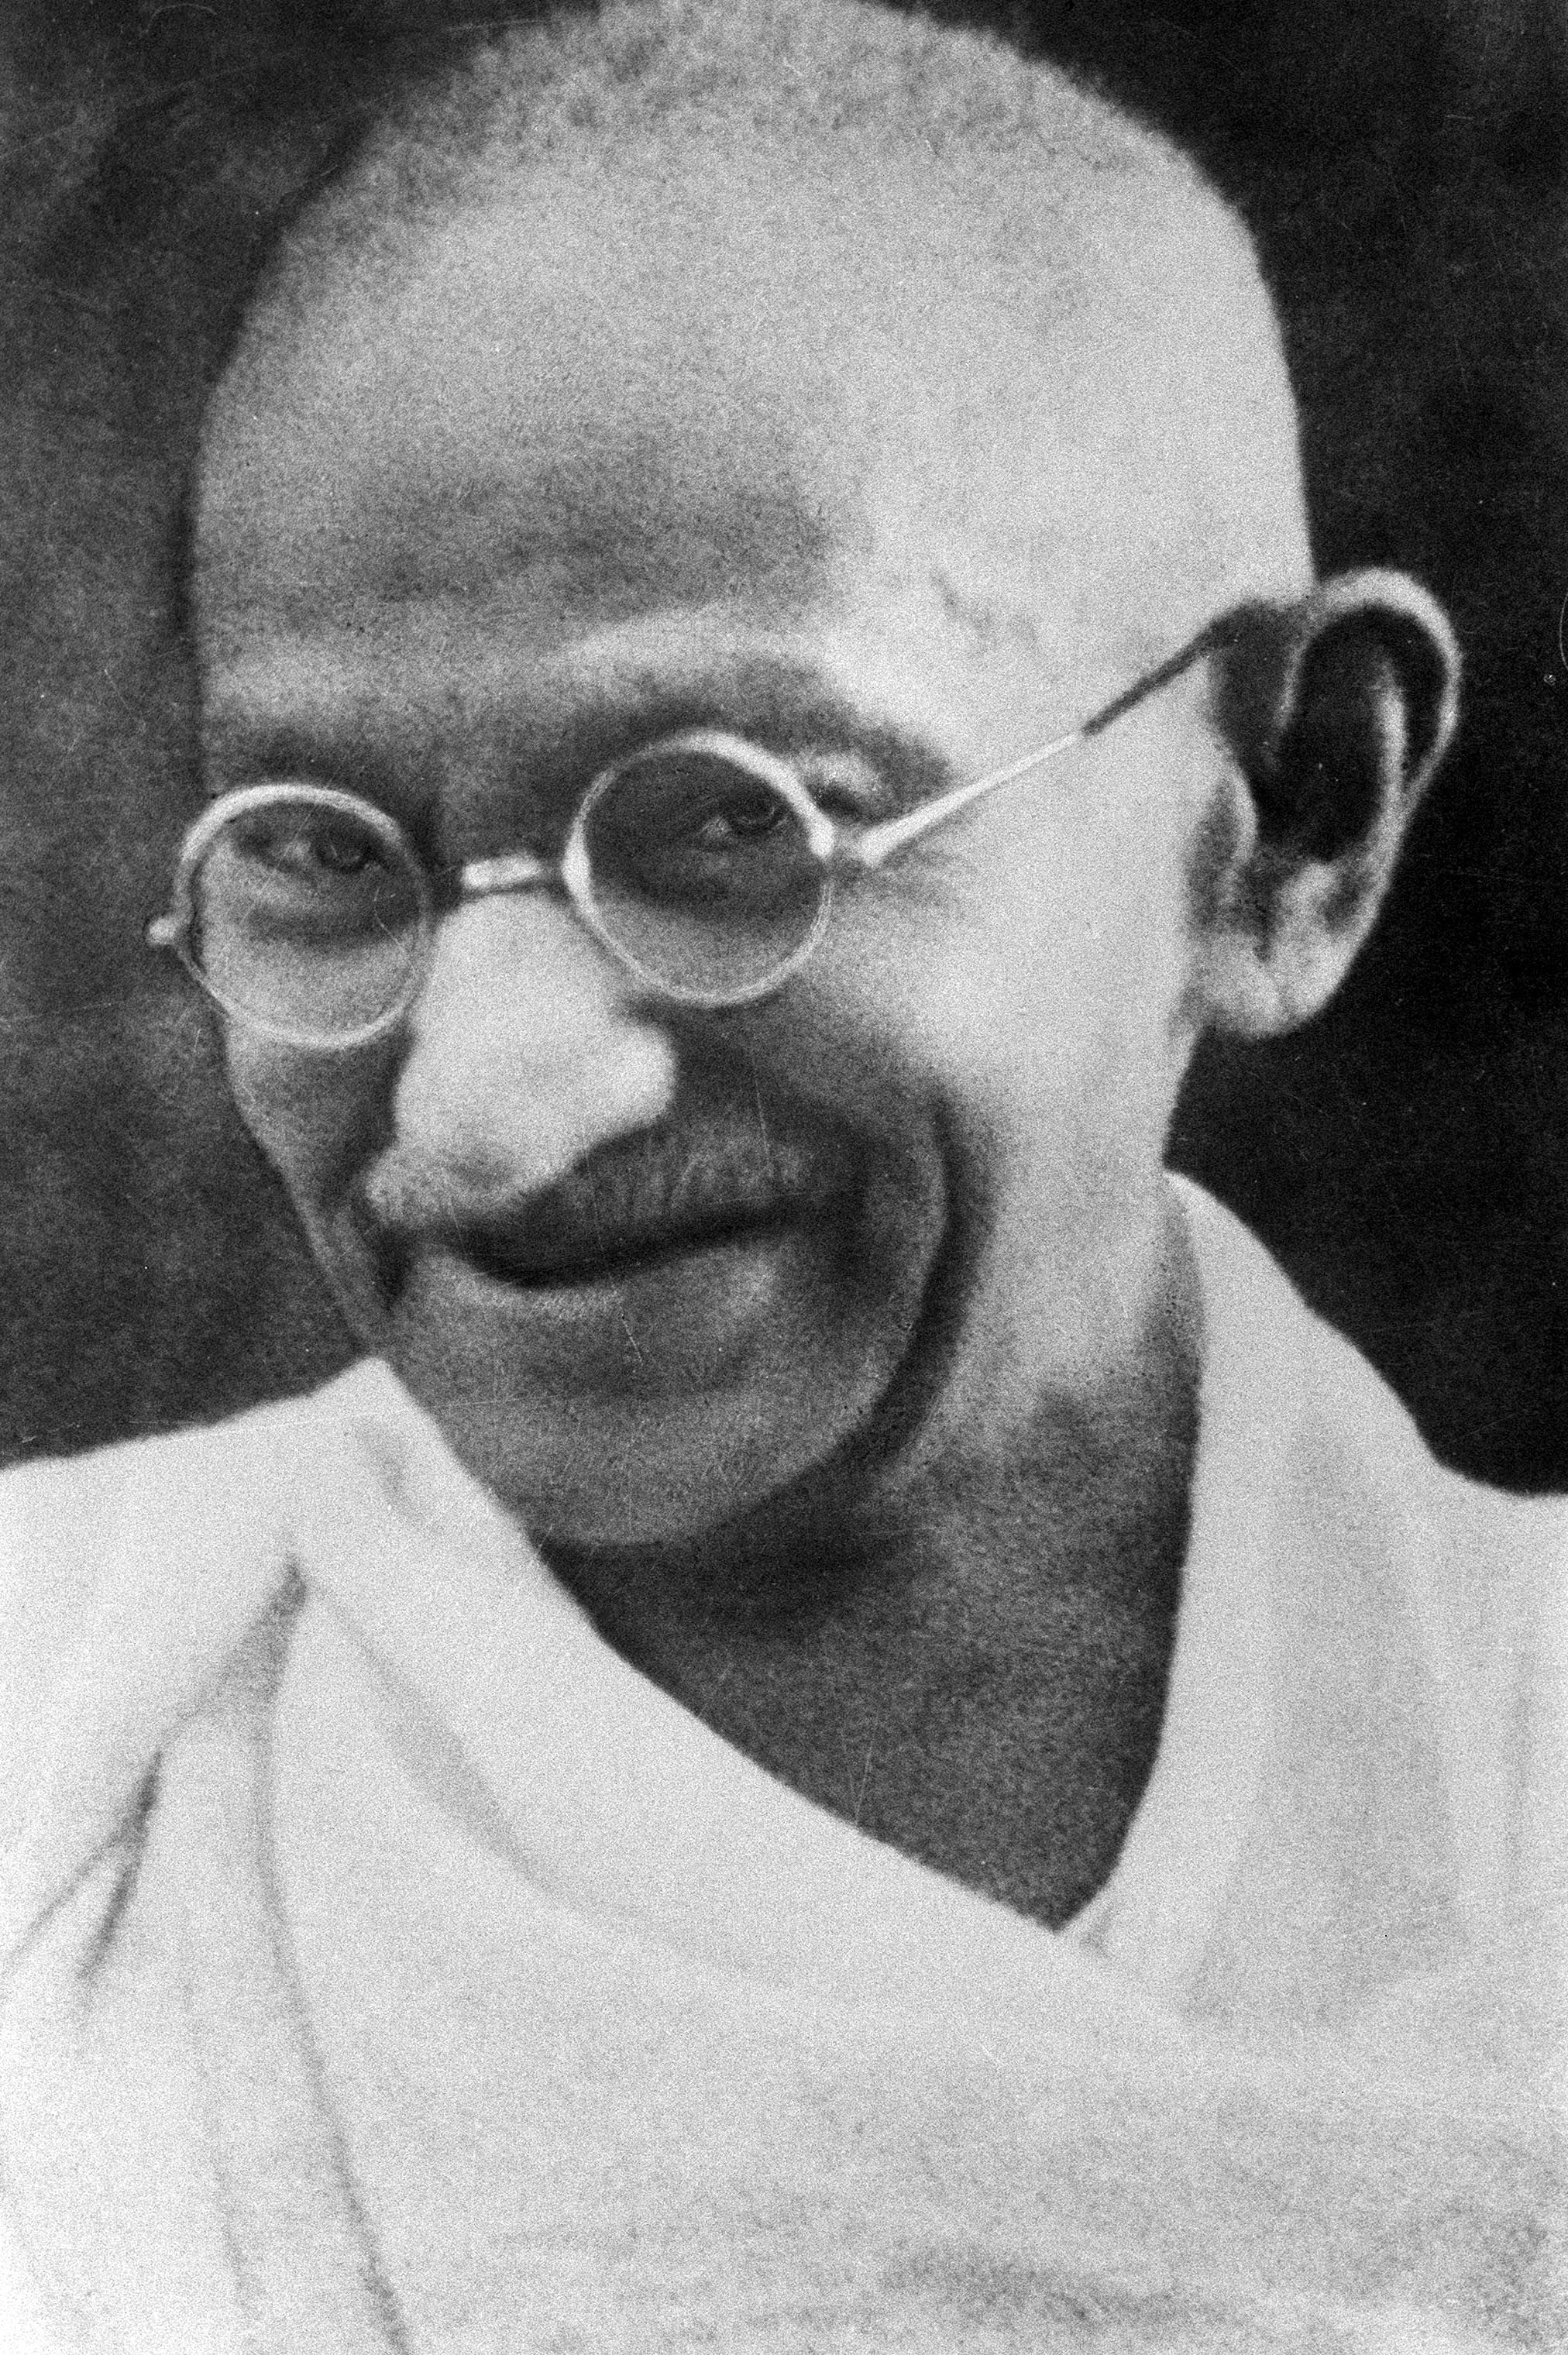 Gandhi, som tillskrivits detta citat: "First they ignore you, then they laugh at you, then they fight you, then you win."